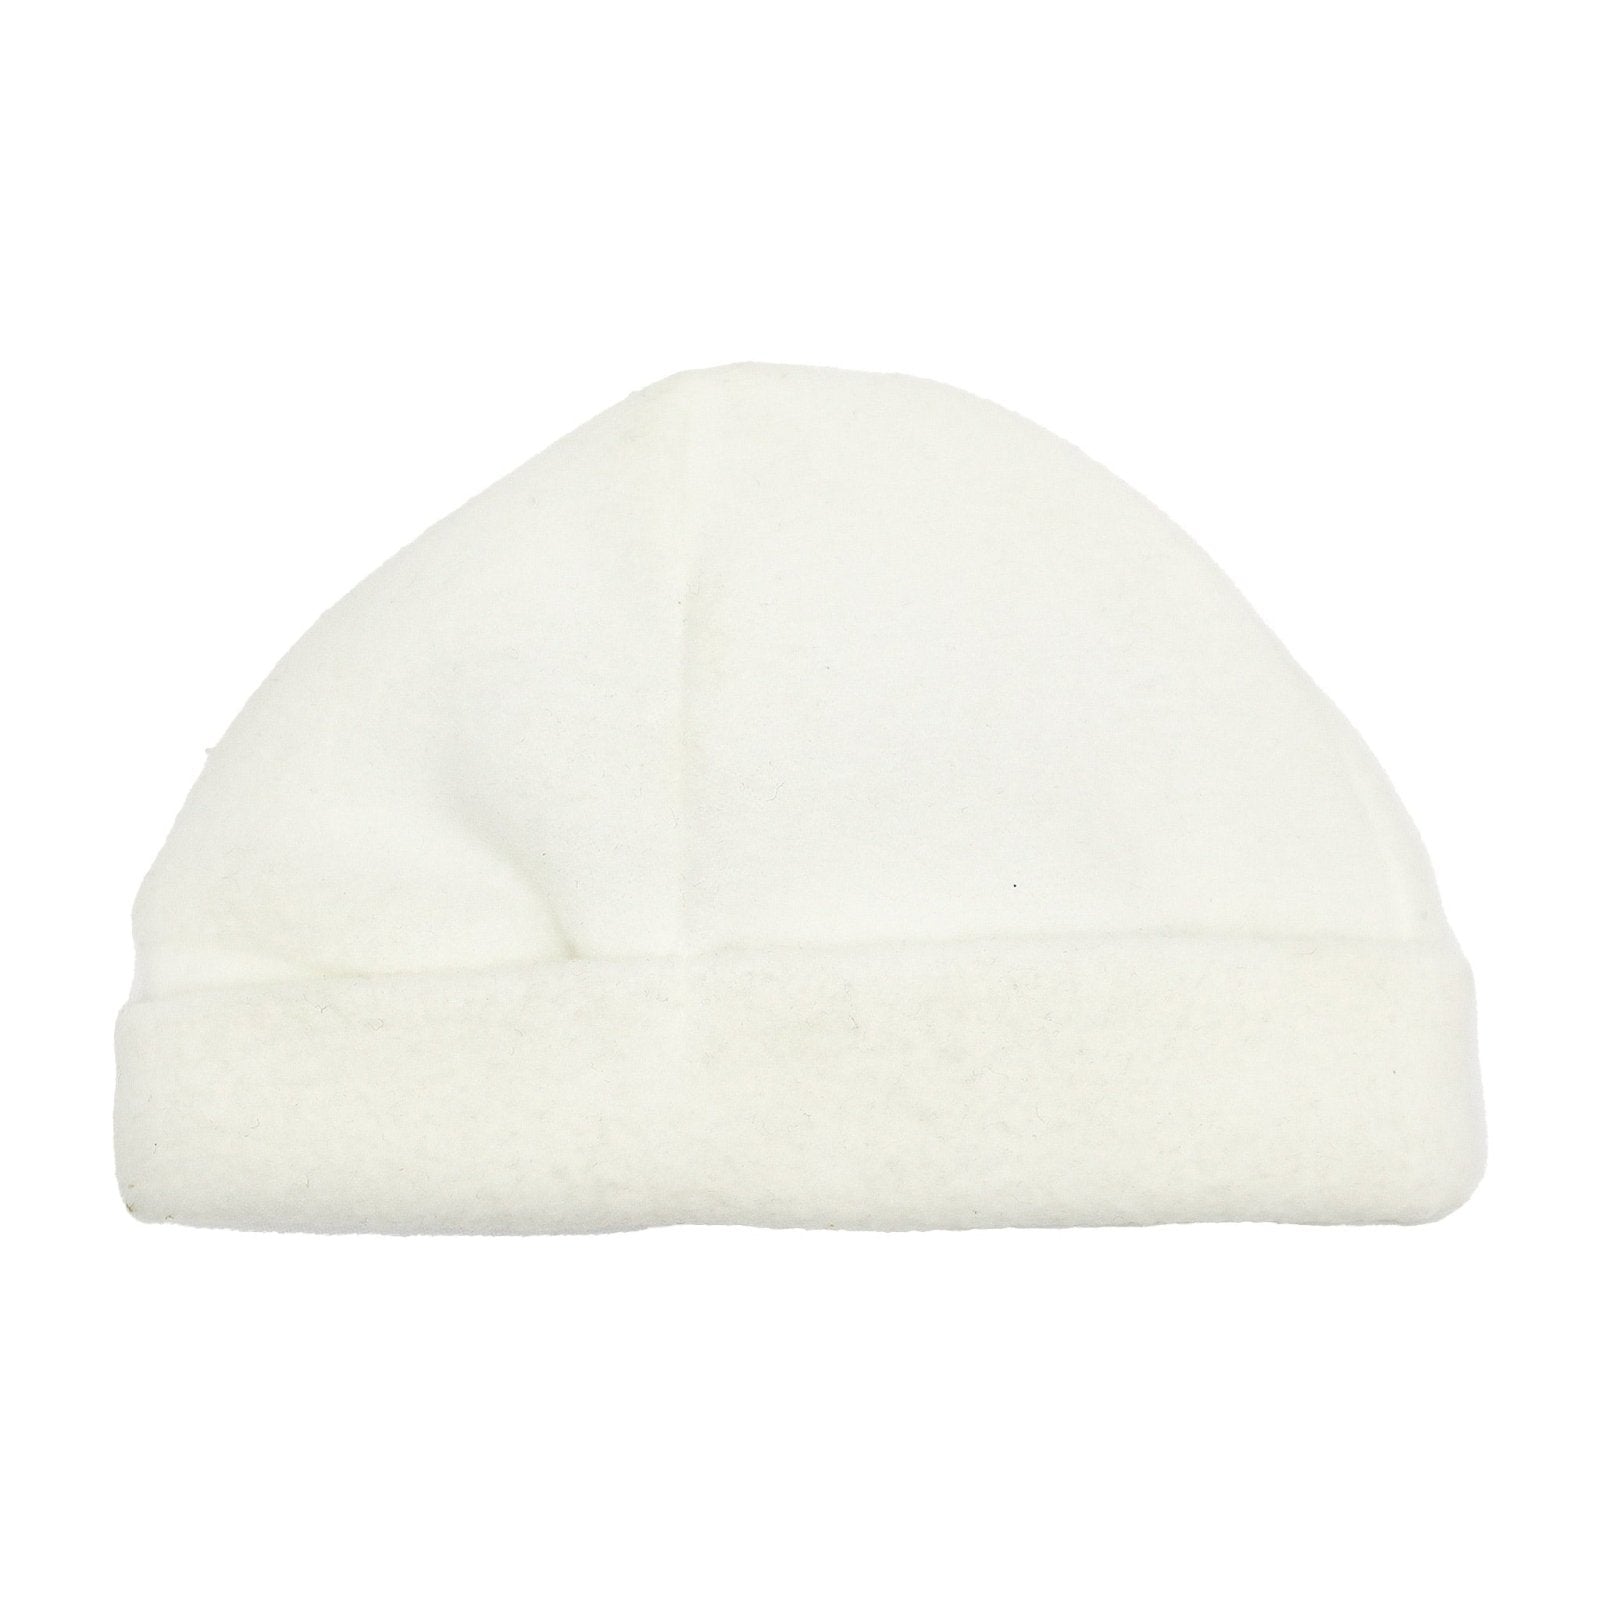 Baby Cap Pollar White Color by Little Darling